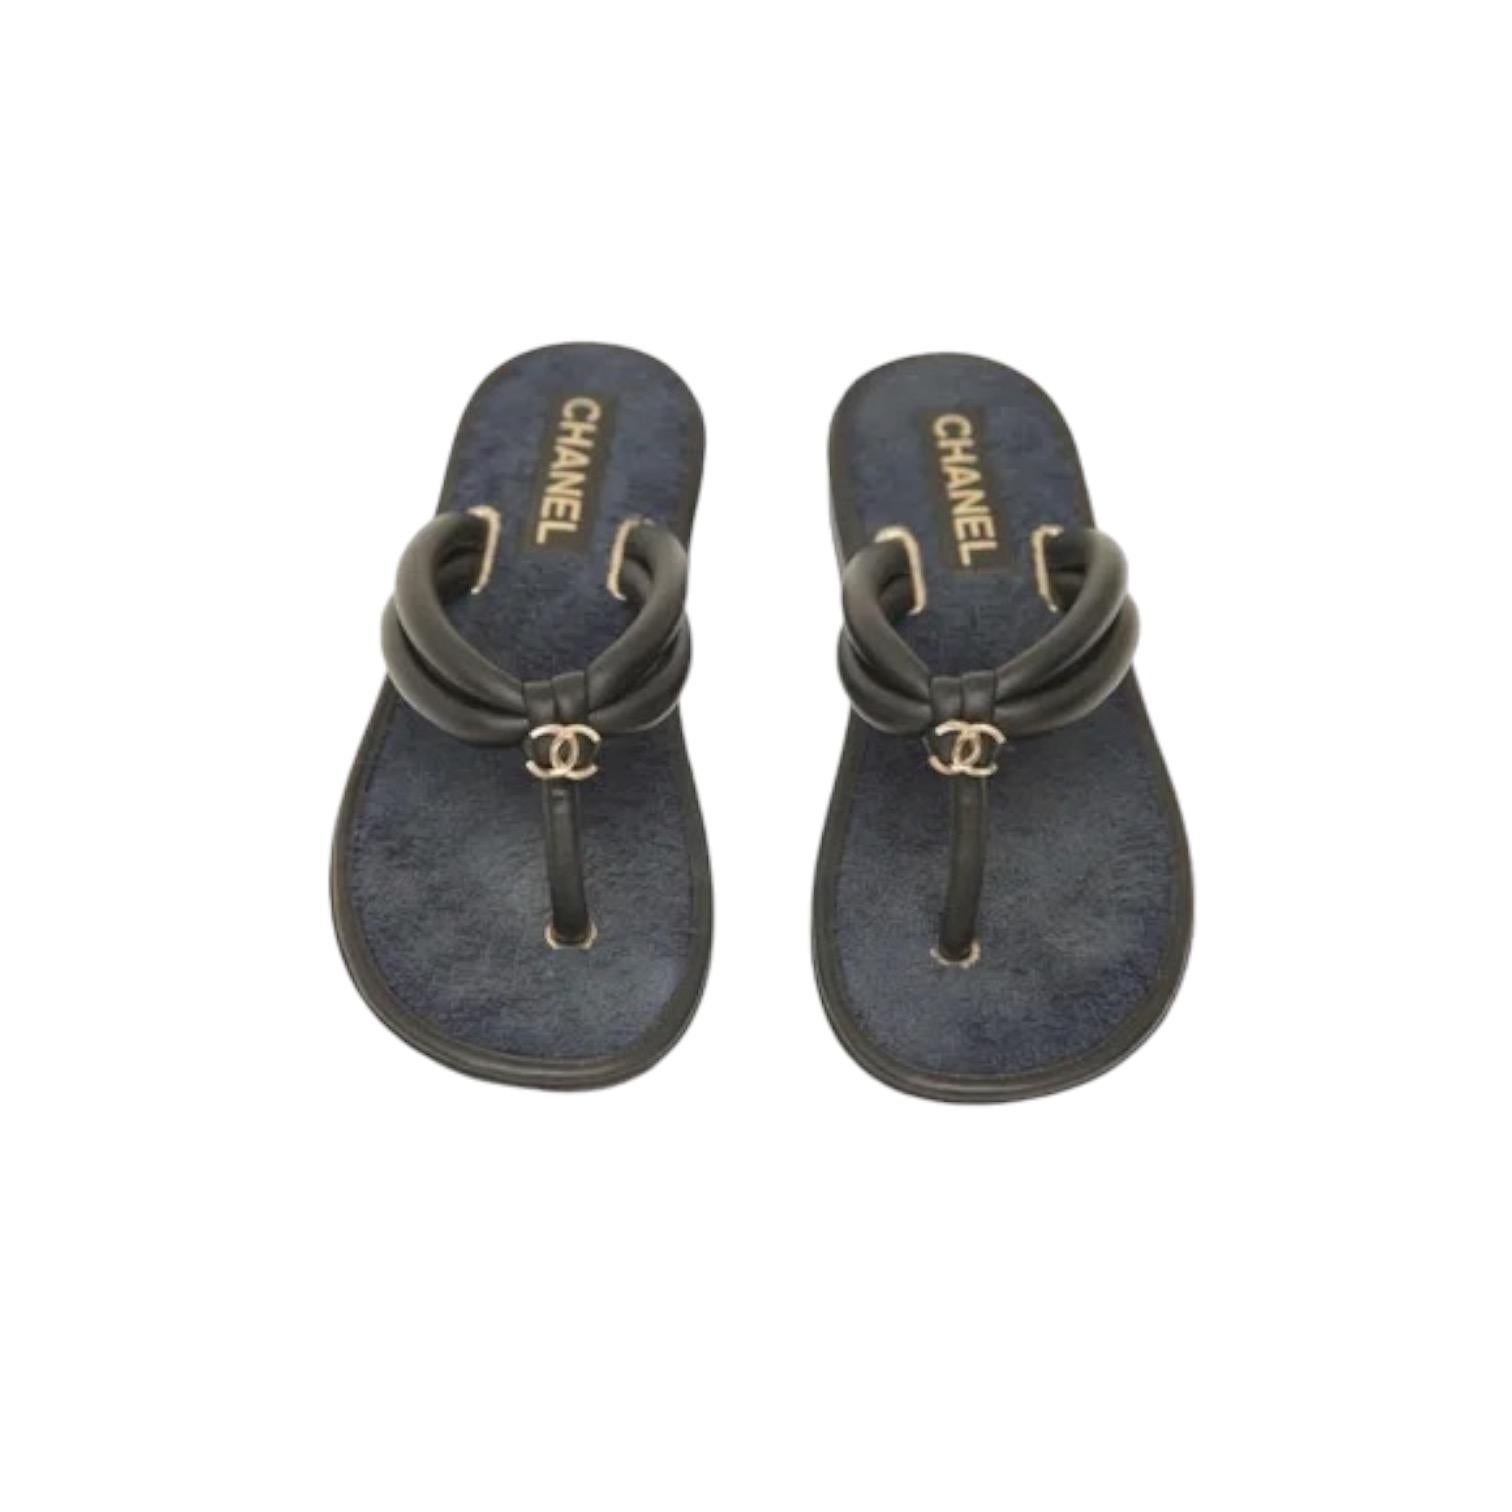 CHANEL Lambskin Leather Slide Thong Sandals Fabric Black Navy Gold CC 38C 1